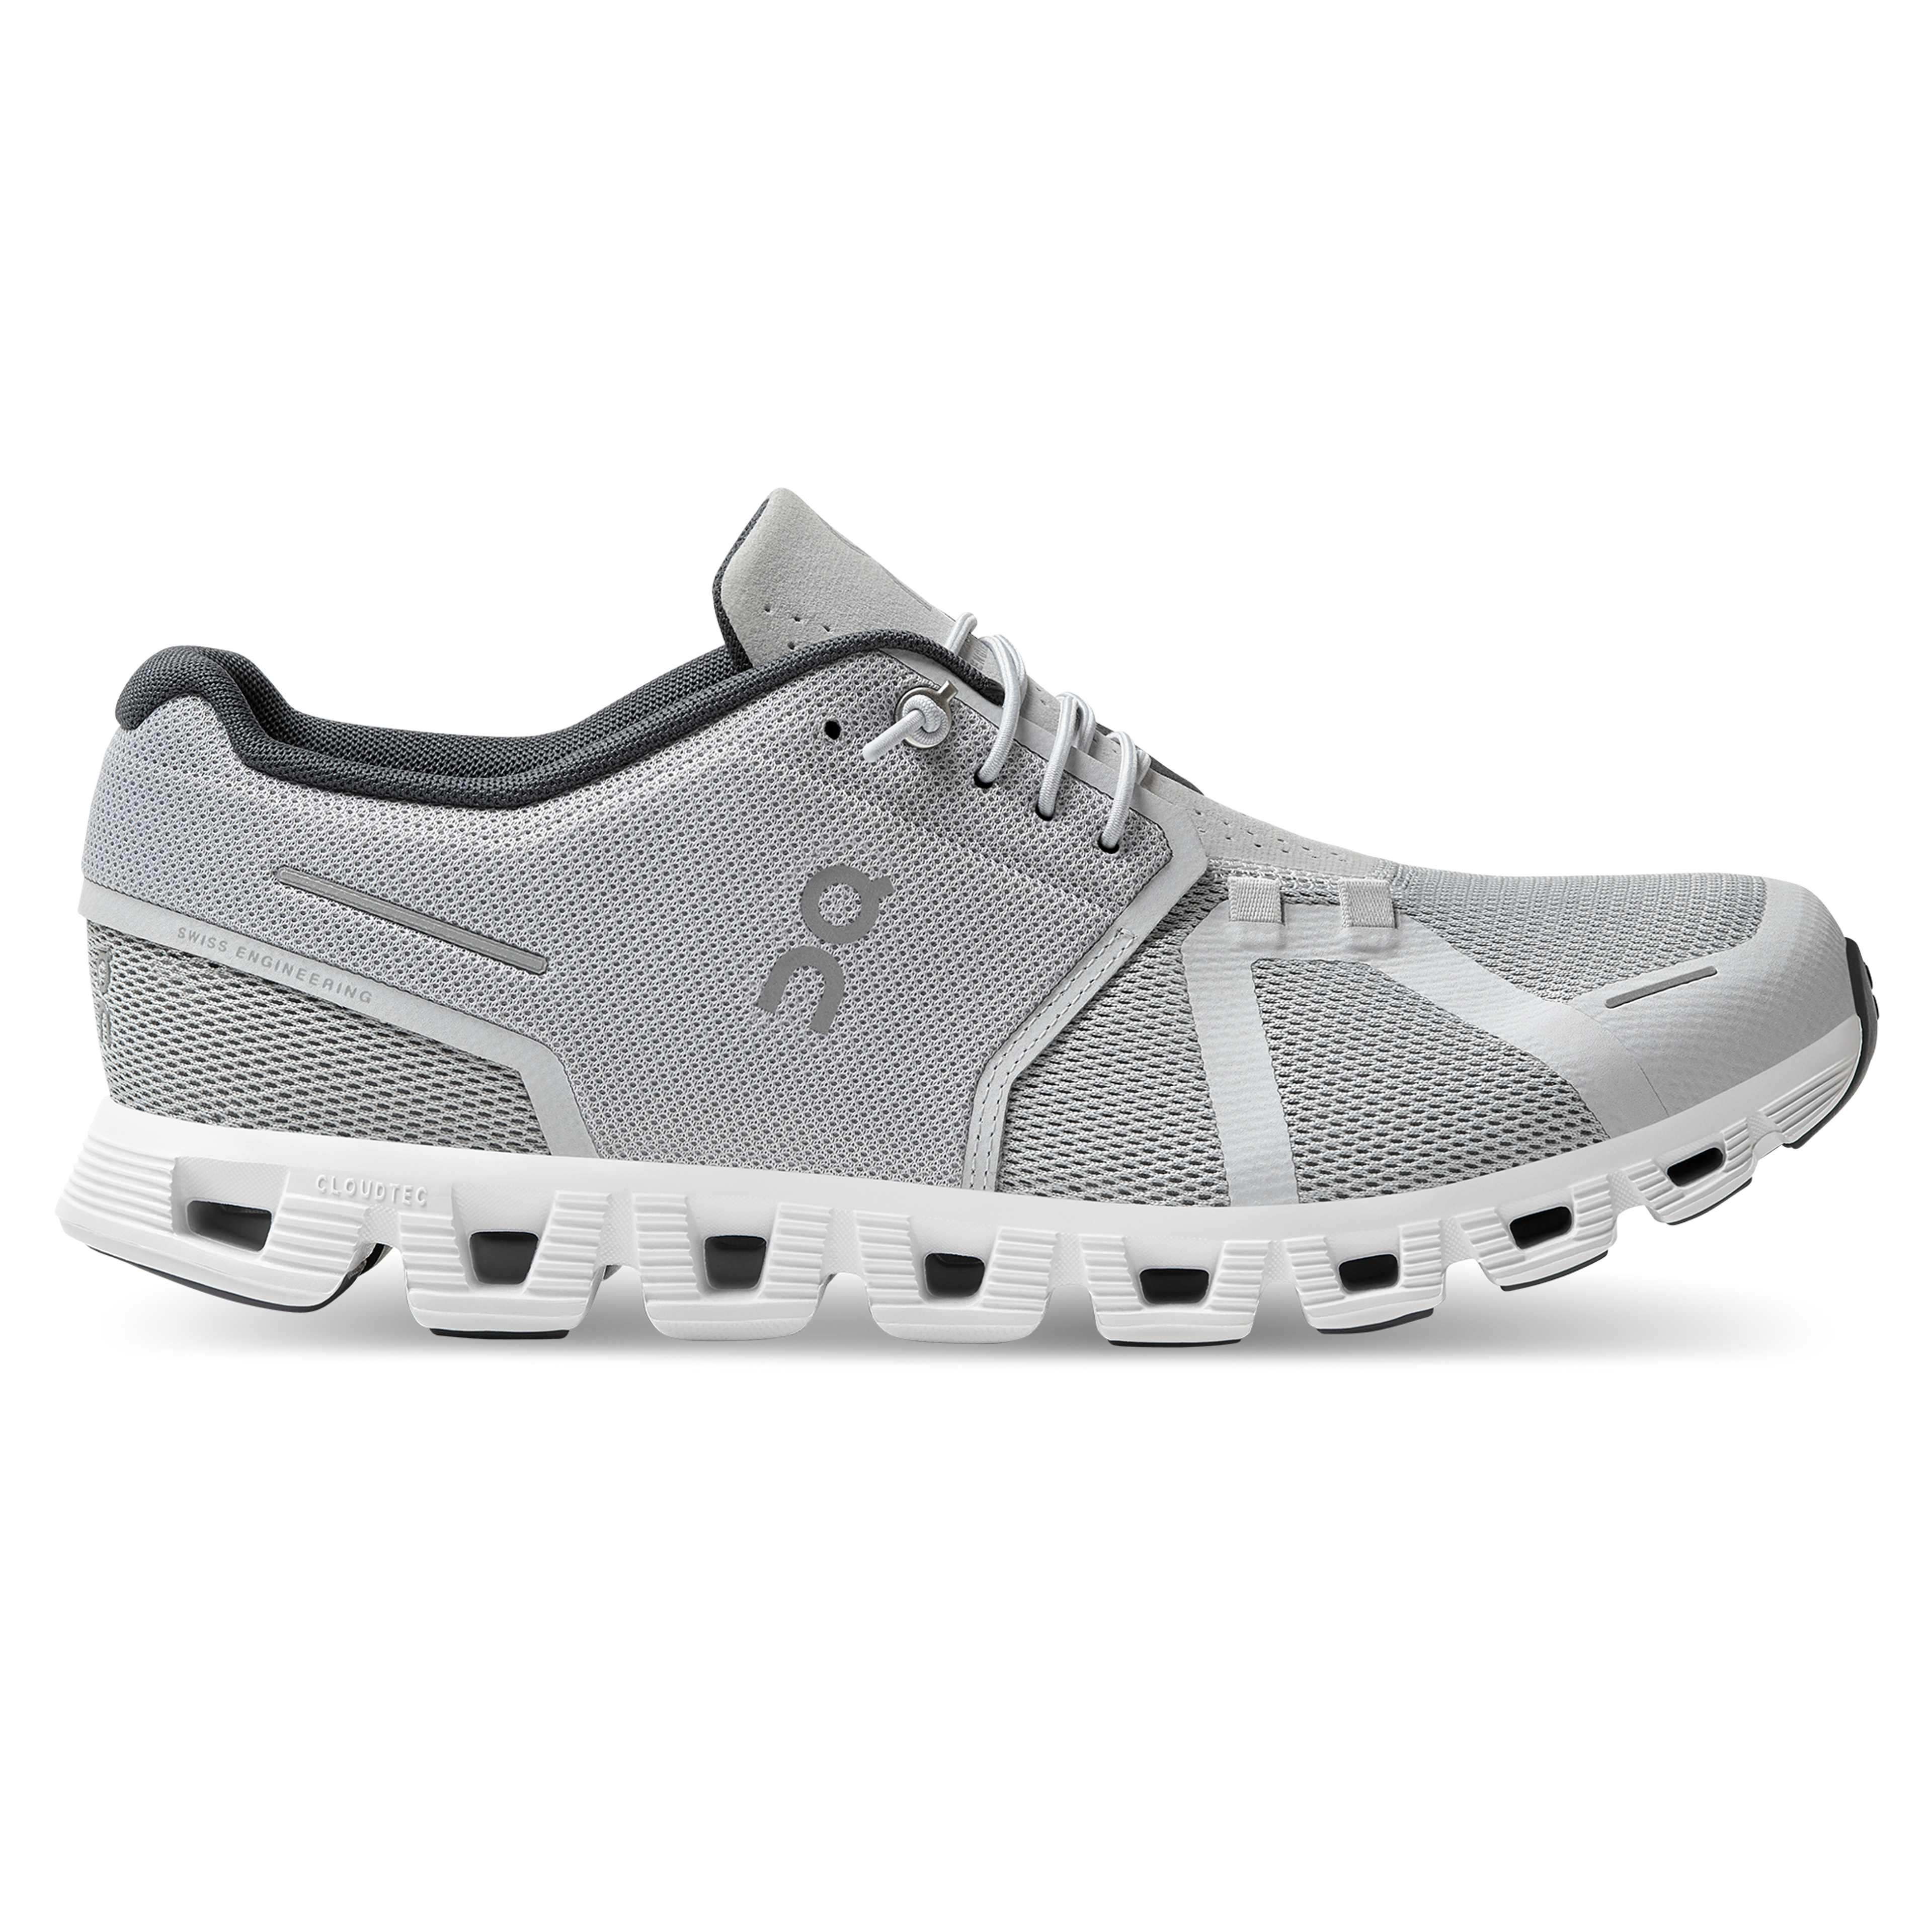 Cloud 5 - the lightweight shoe for everyday performance | On